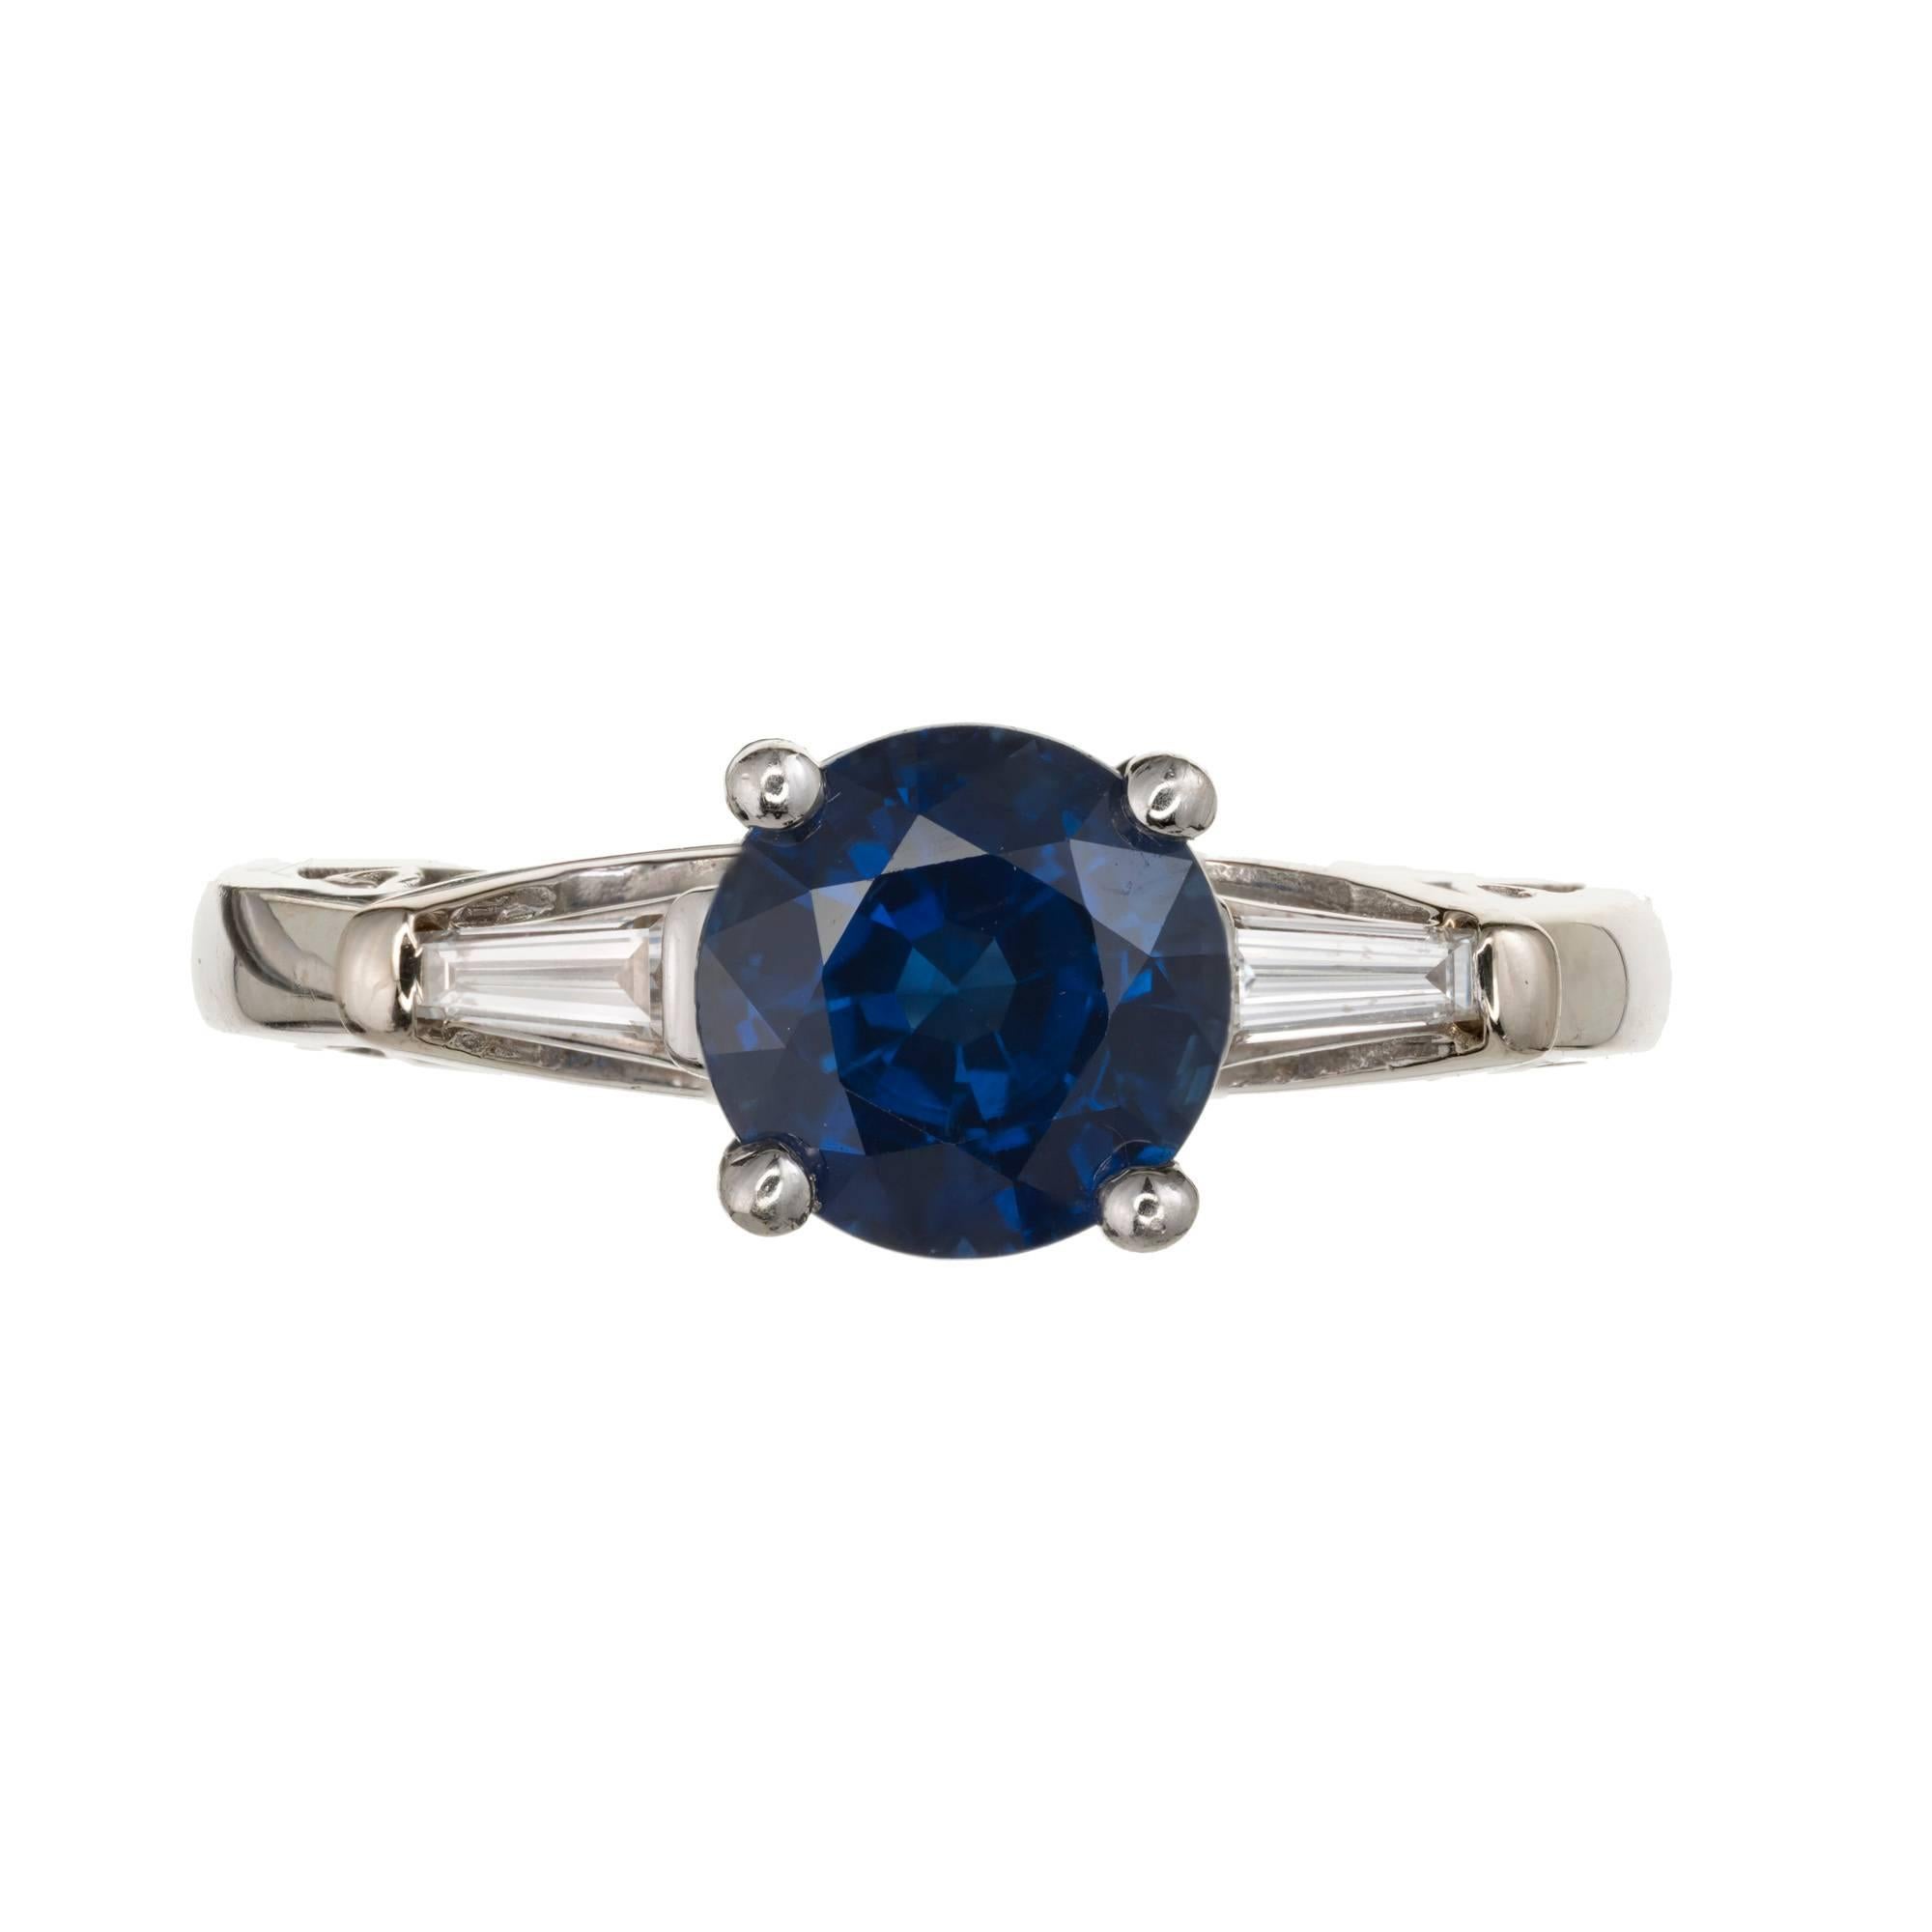 Royal blue Sapphire diamond three-stone engagement ring 2.37ct round simple heat only and certified natural corundum. Beautiful baguette ring by Del Co. 

14k white gold
1 round Royal blue Sapphire, approx. total weight 2.37cts, natural Sapphire,